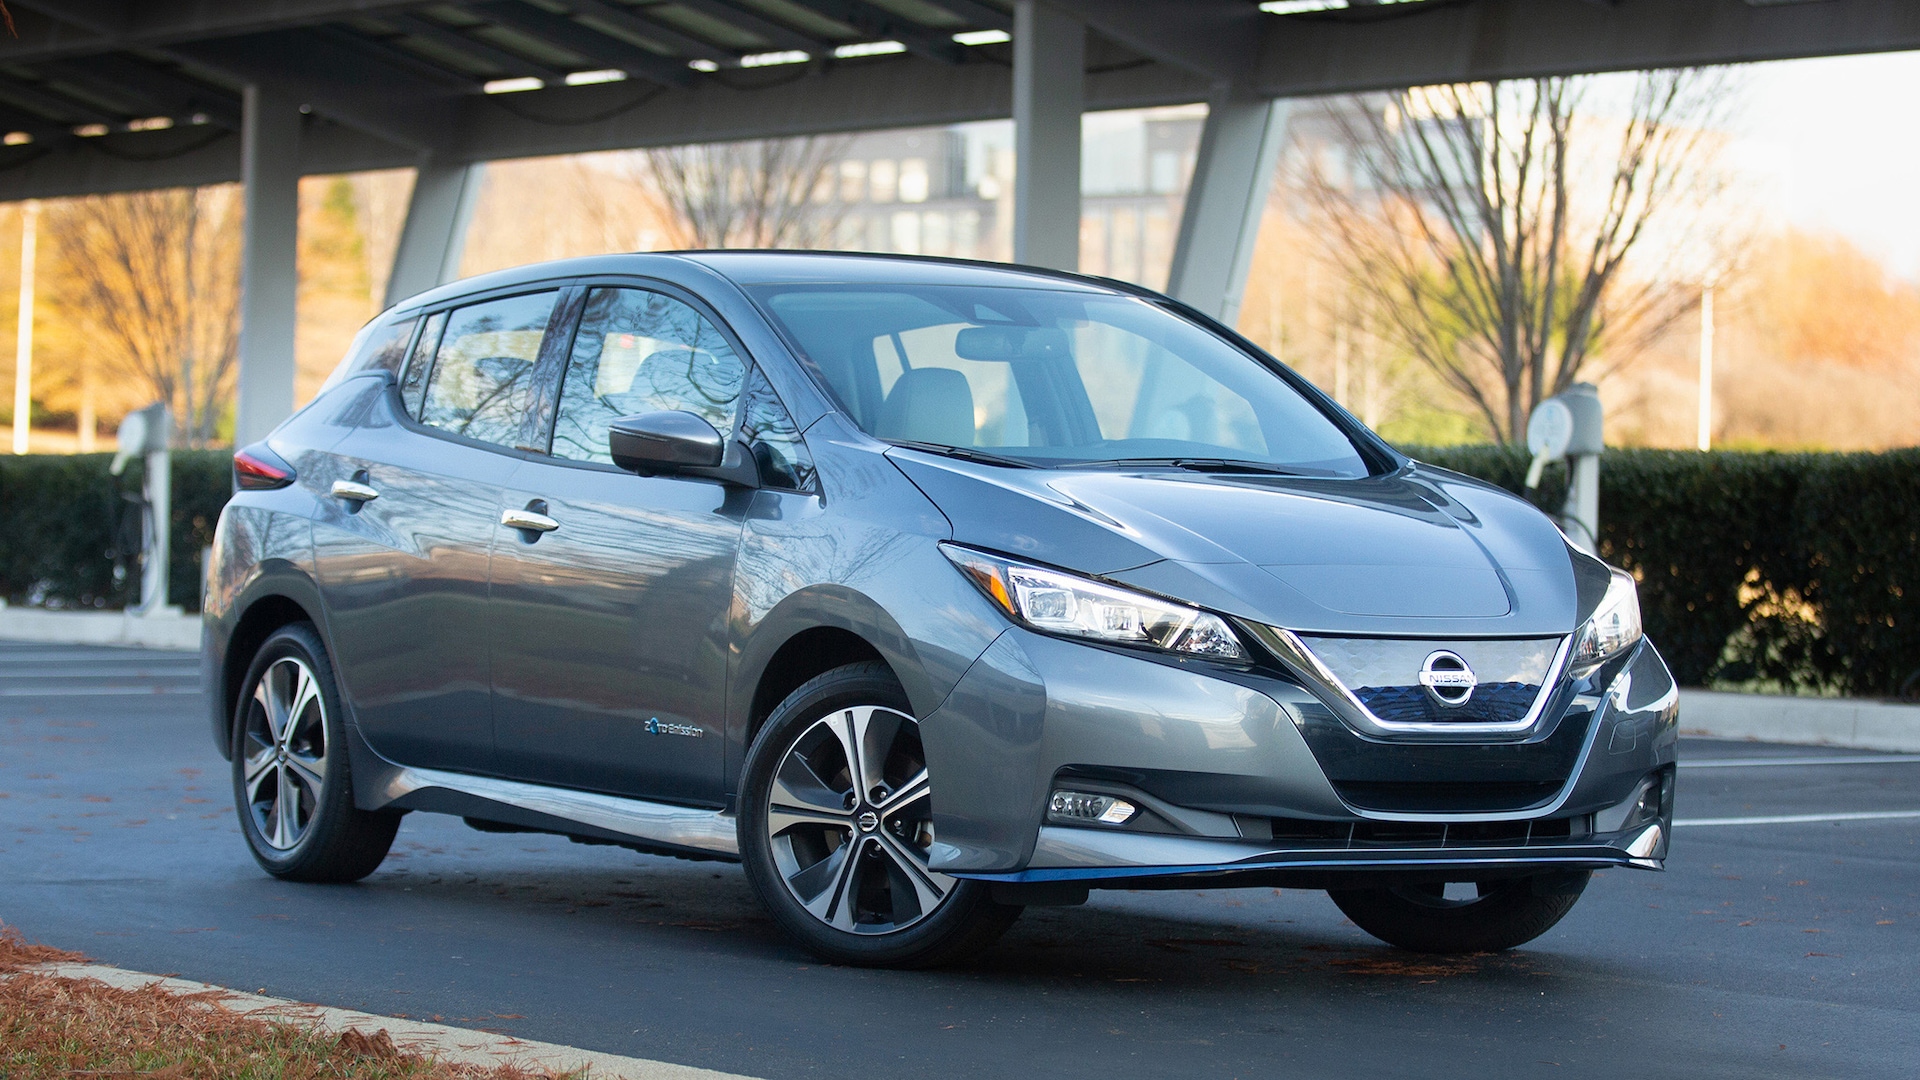 2022 Nissan LEAF Prices, Reviews, and Photos - MotorTrend